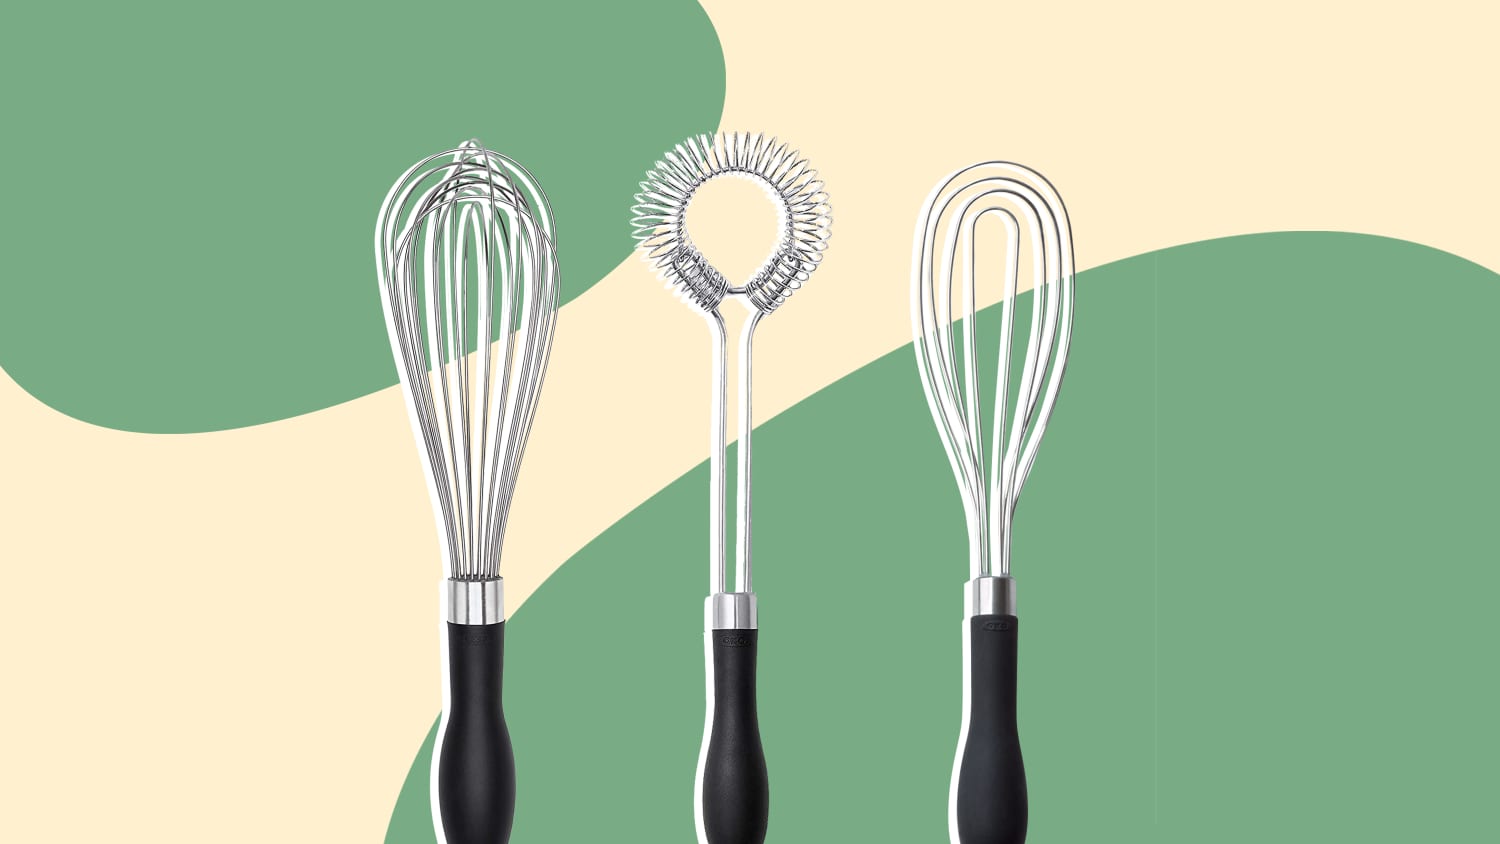 Tovolo 9 inch Stainless Steel Beat Whisk